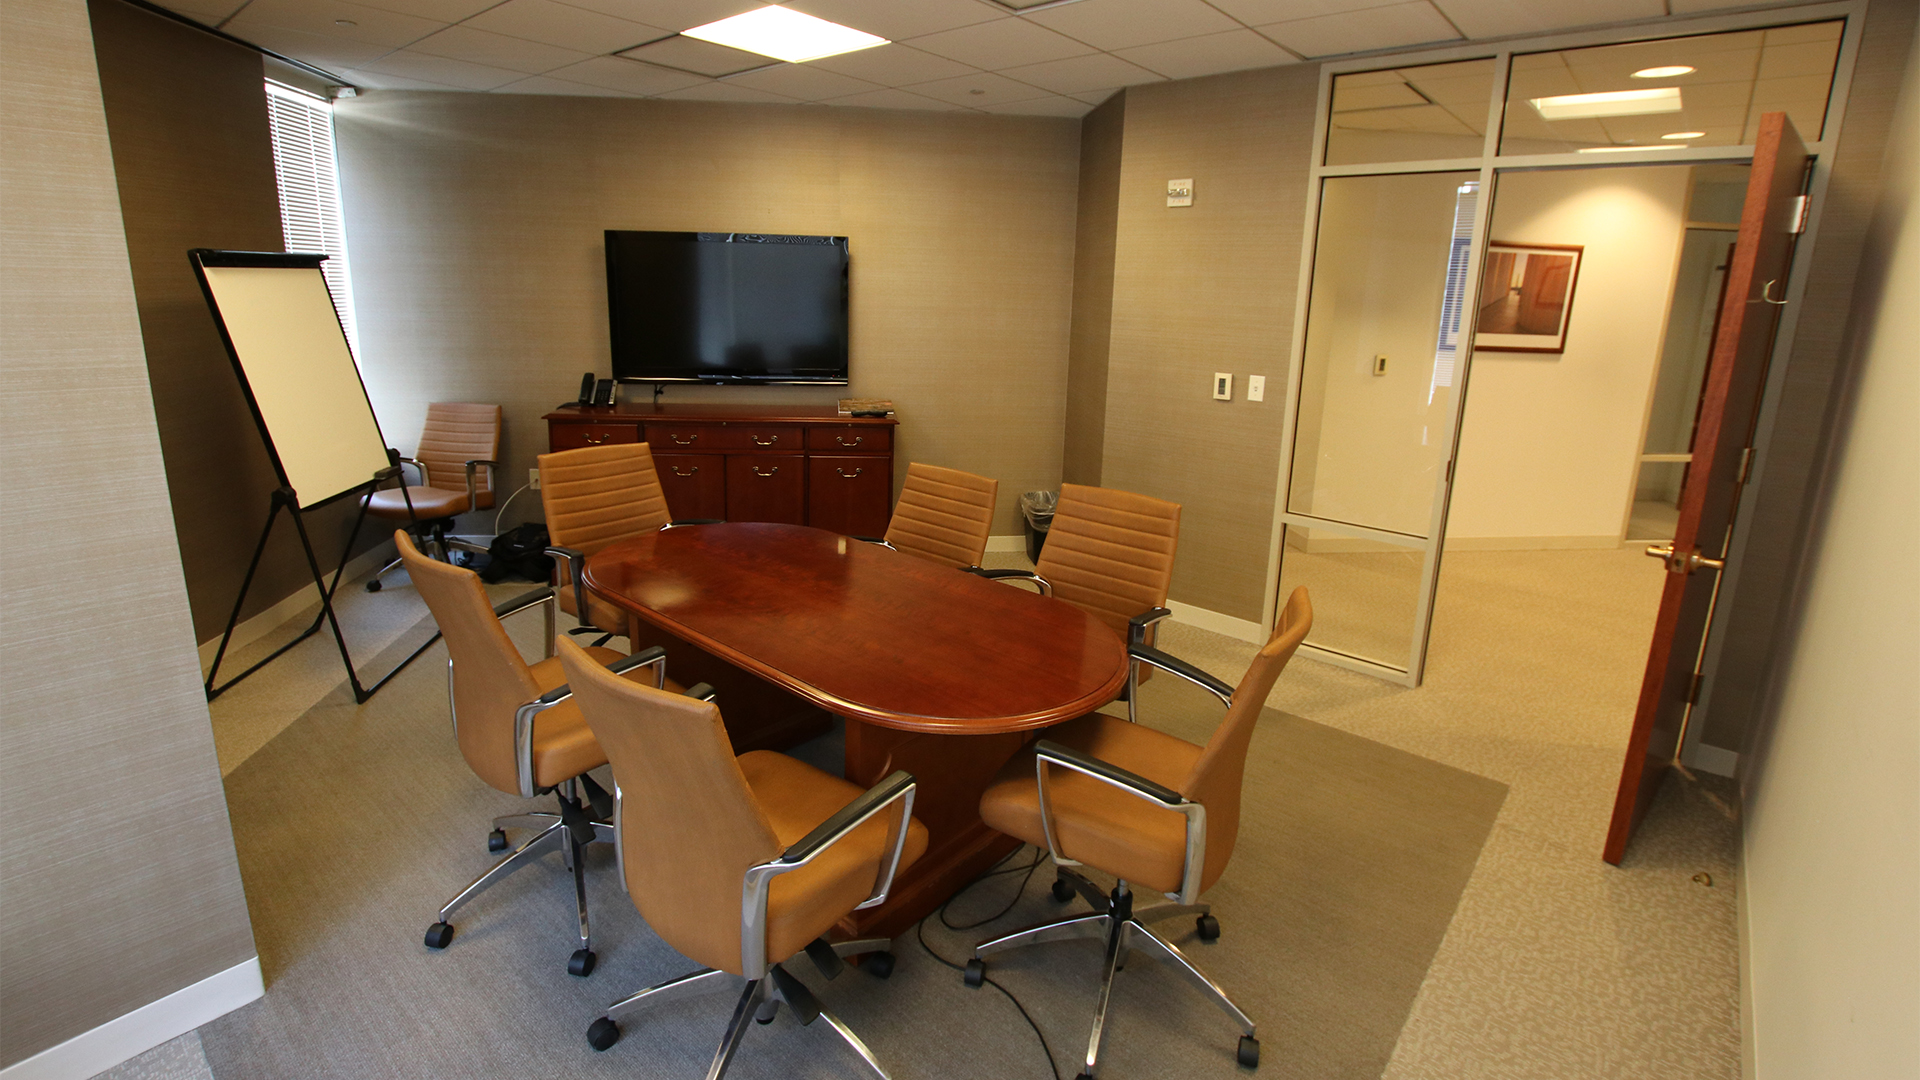 101 Constitution Ave NW - conf room